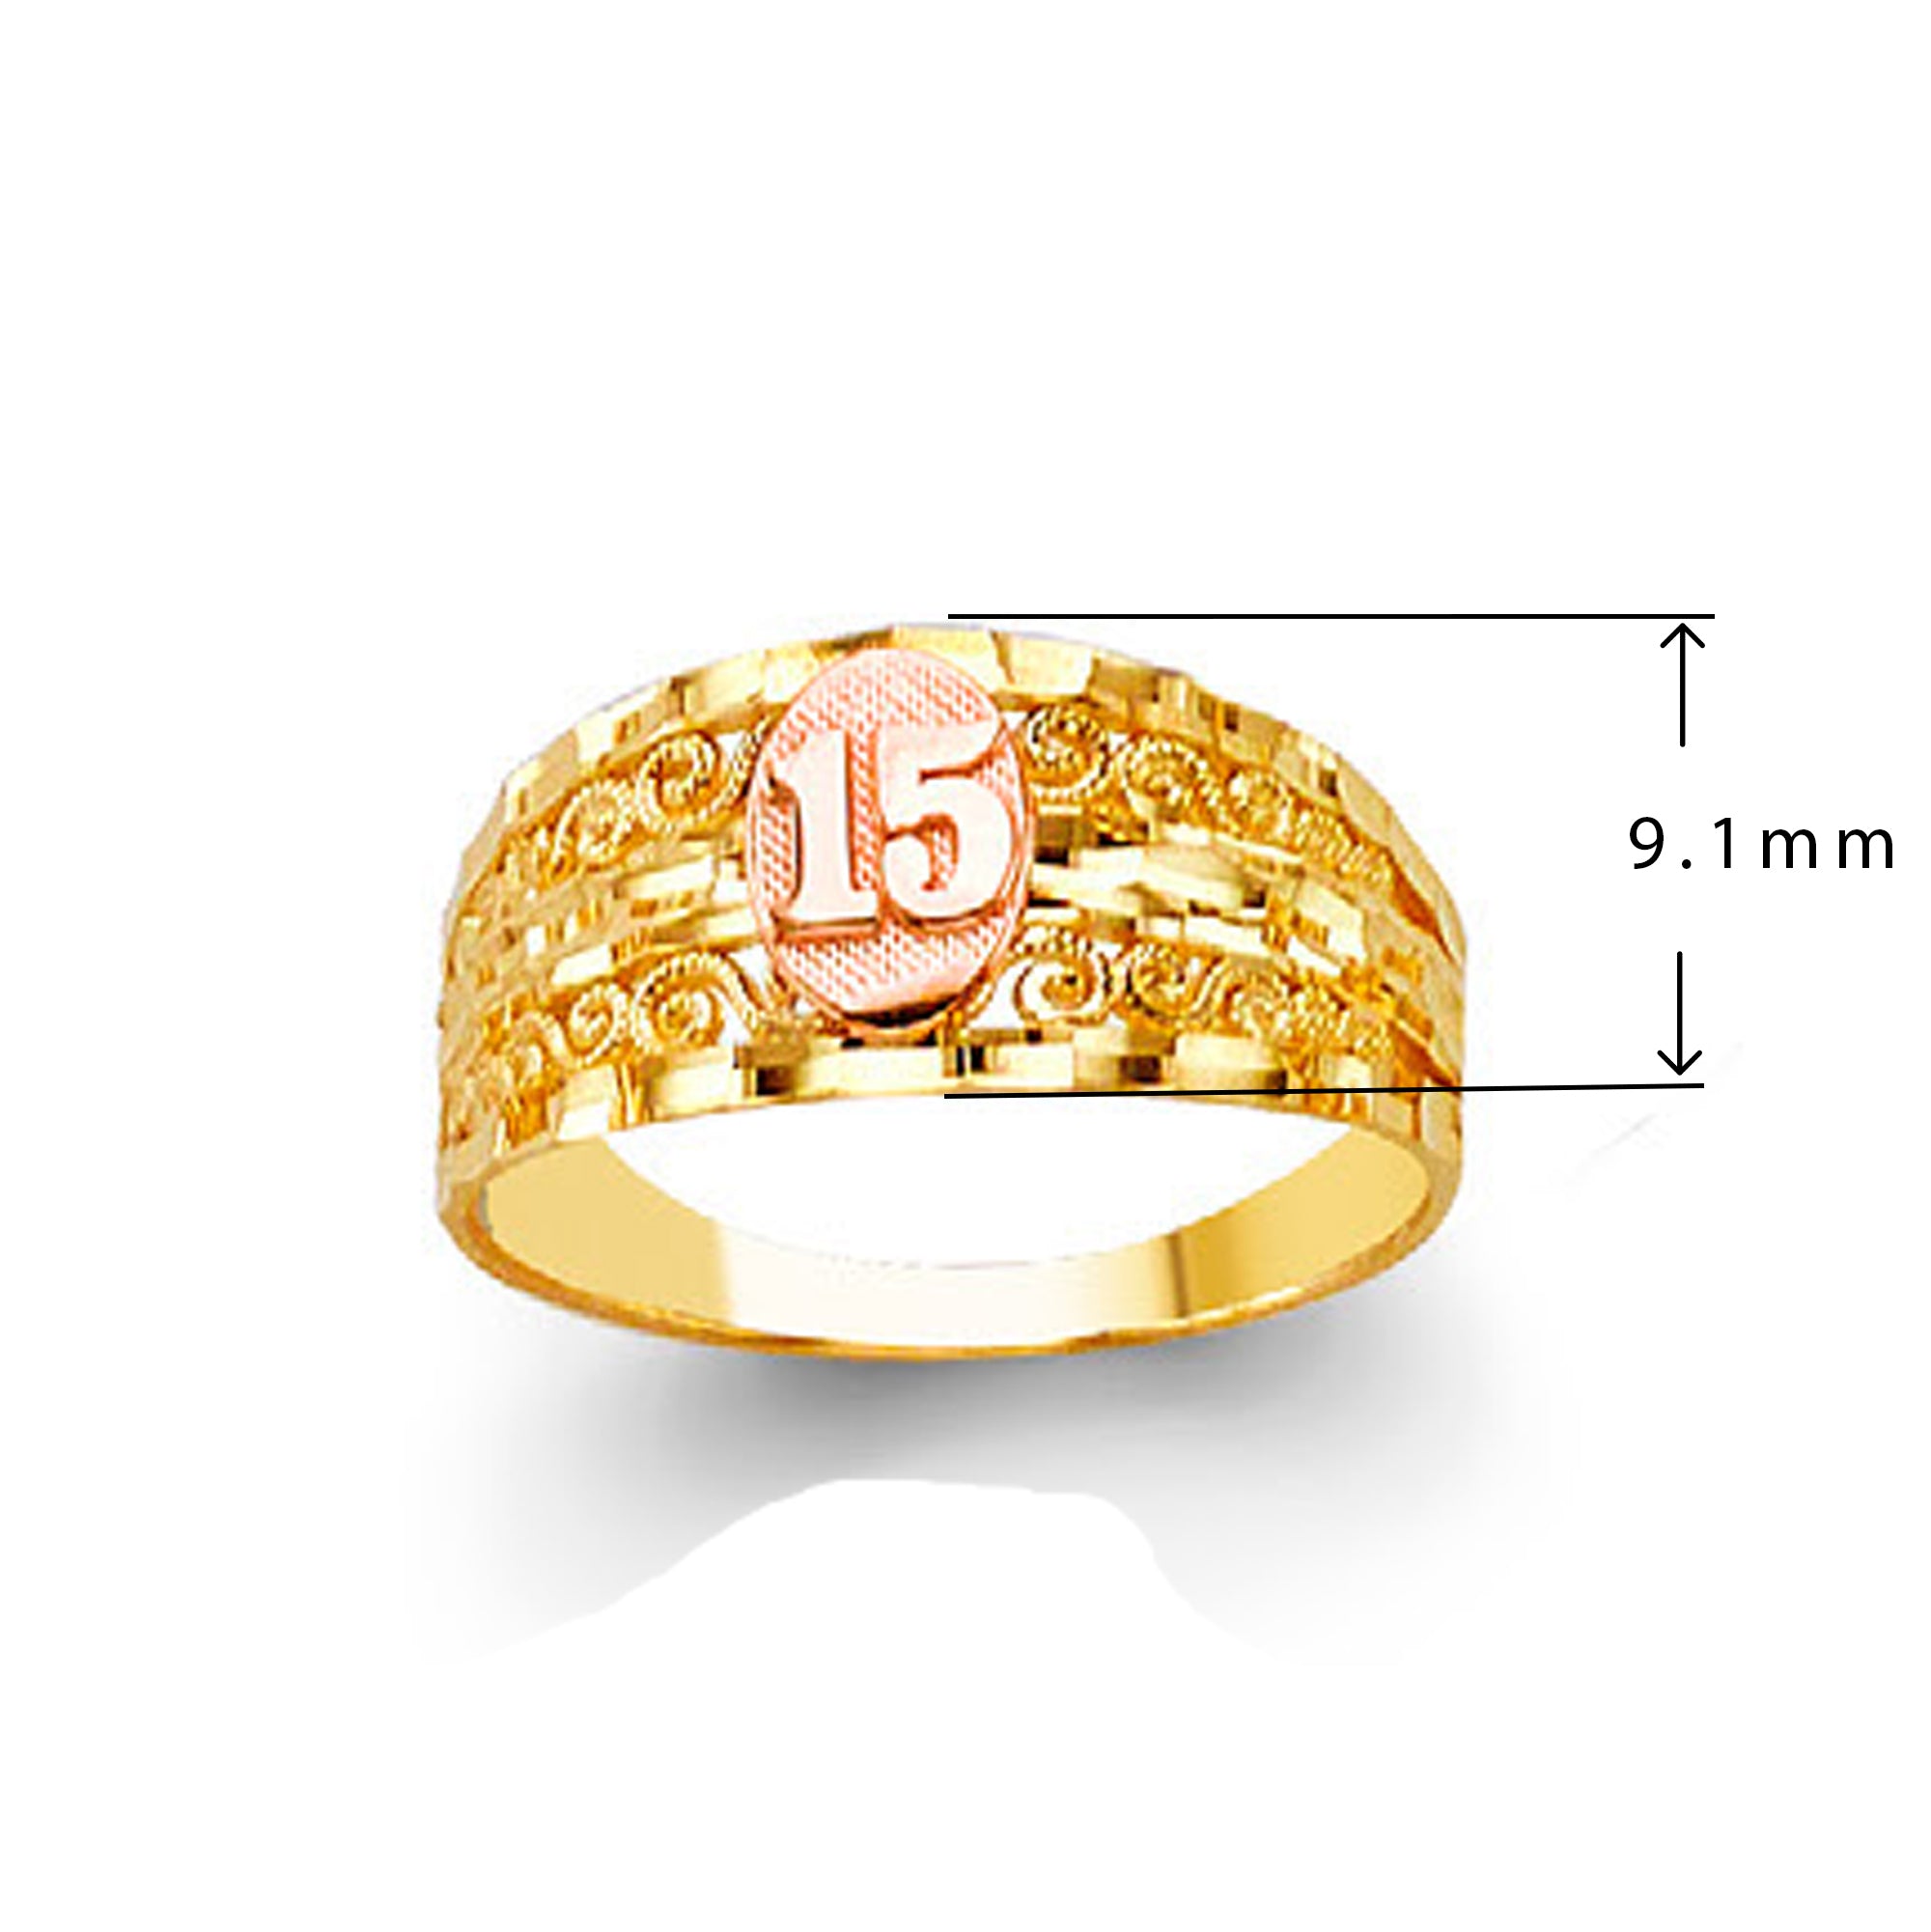 Magnificent Minute Carvings Anniversary Ring in Solid Gold with Measurement